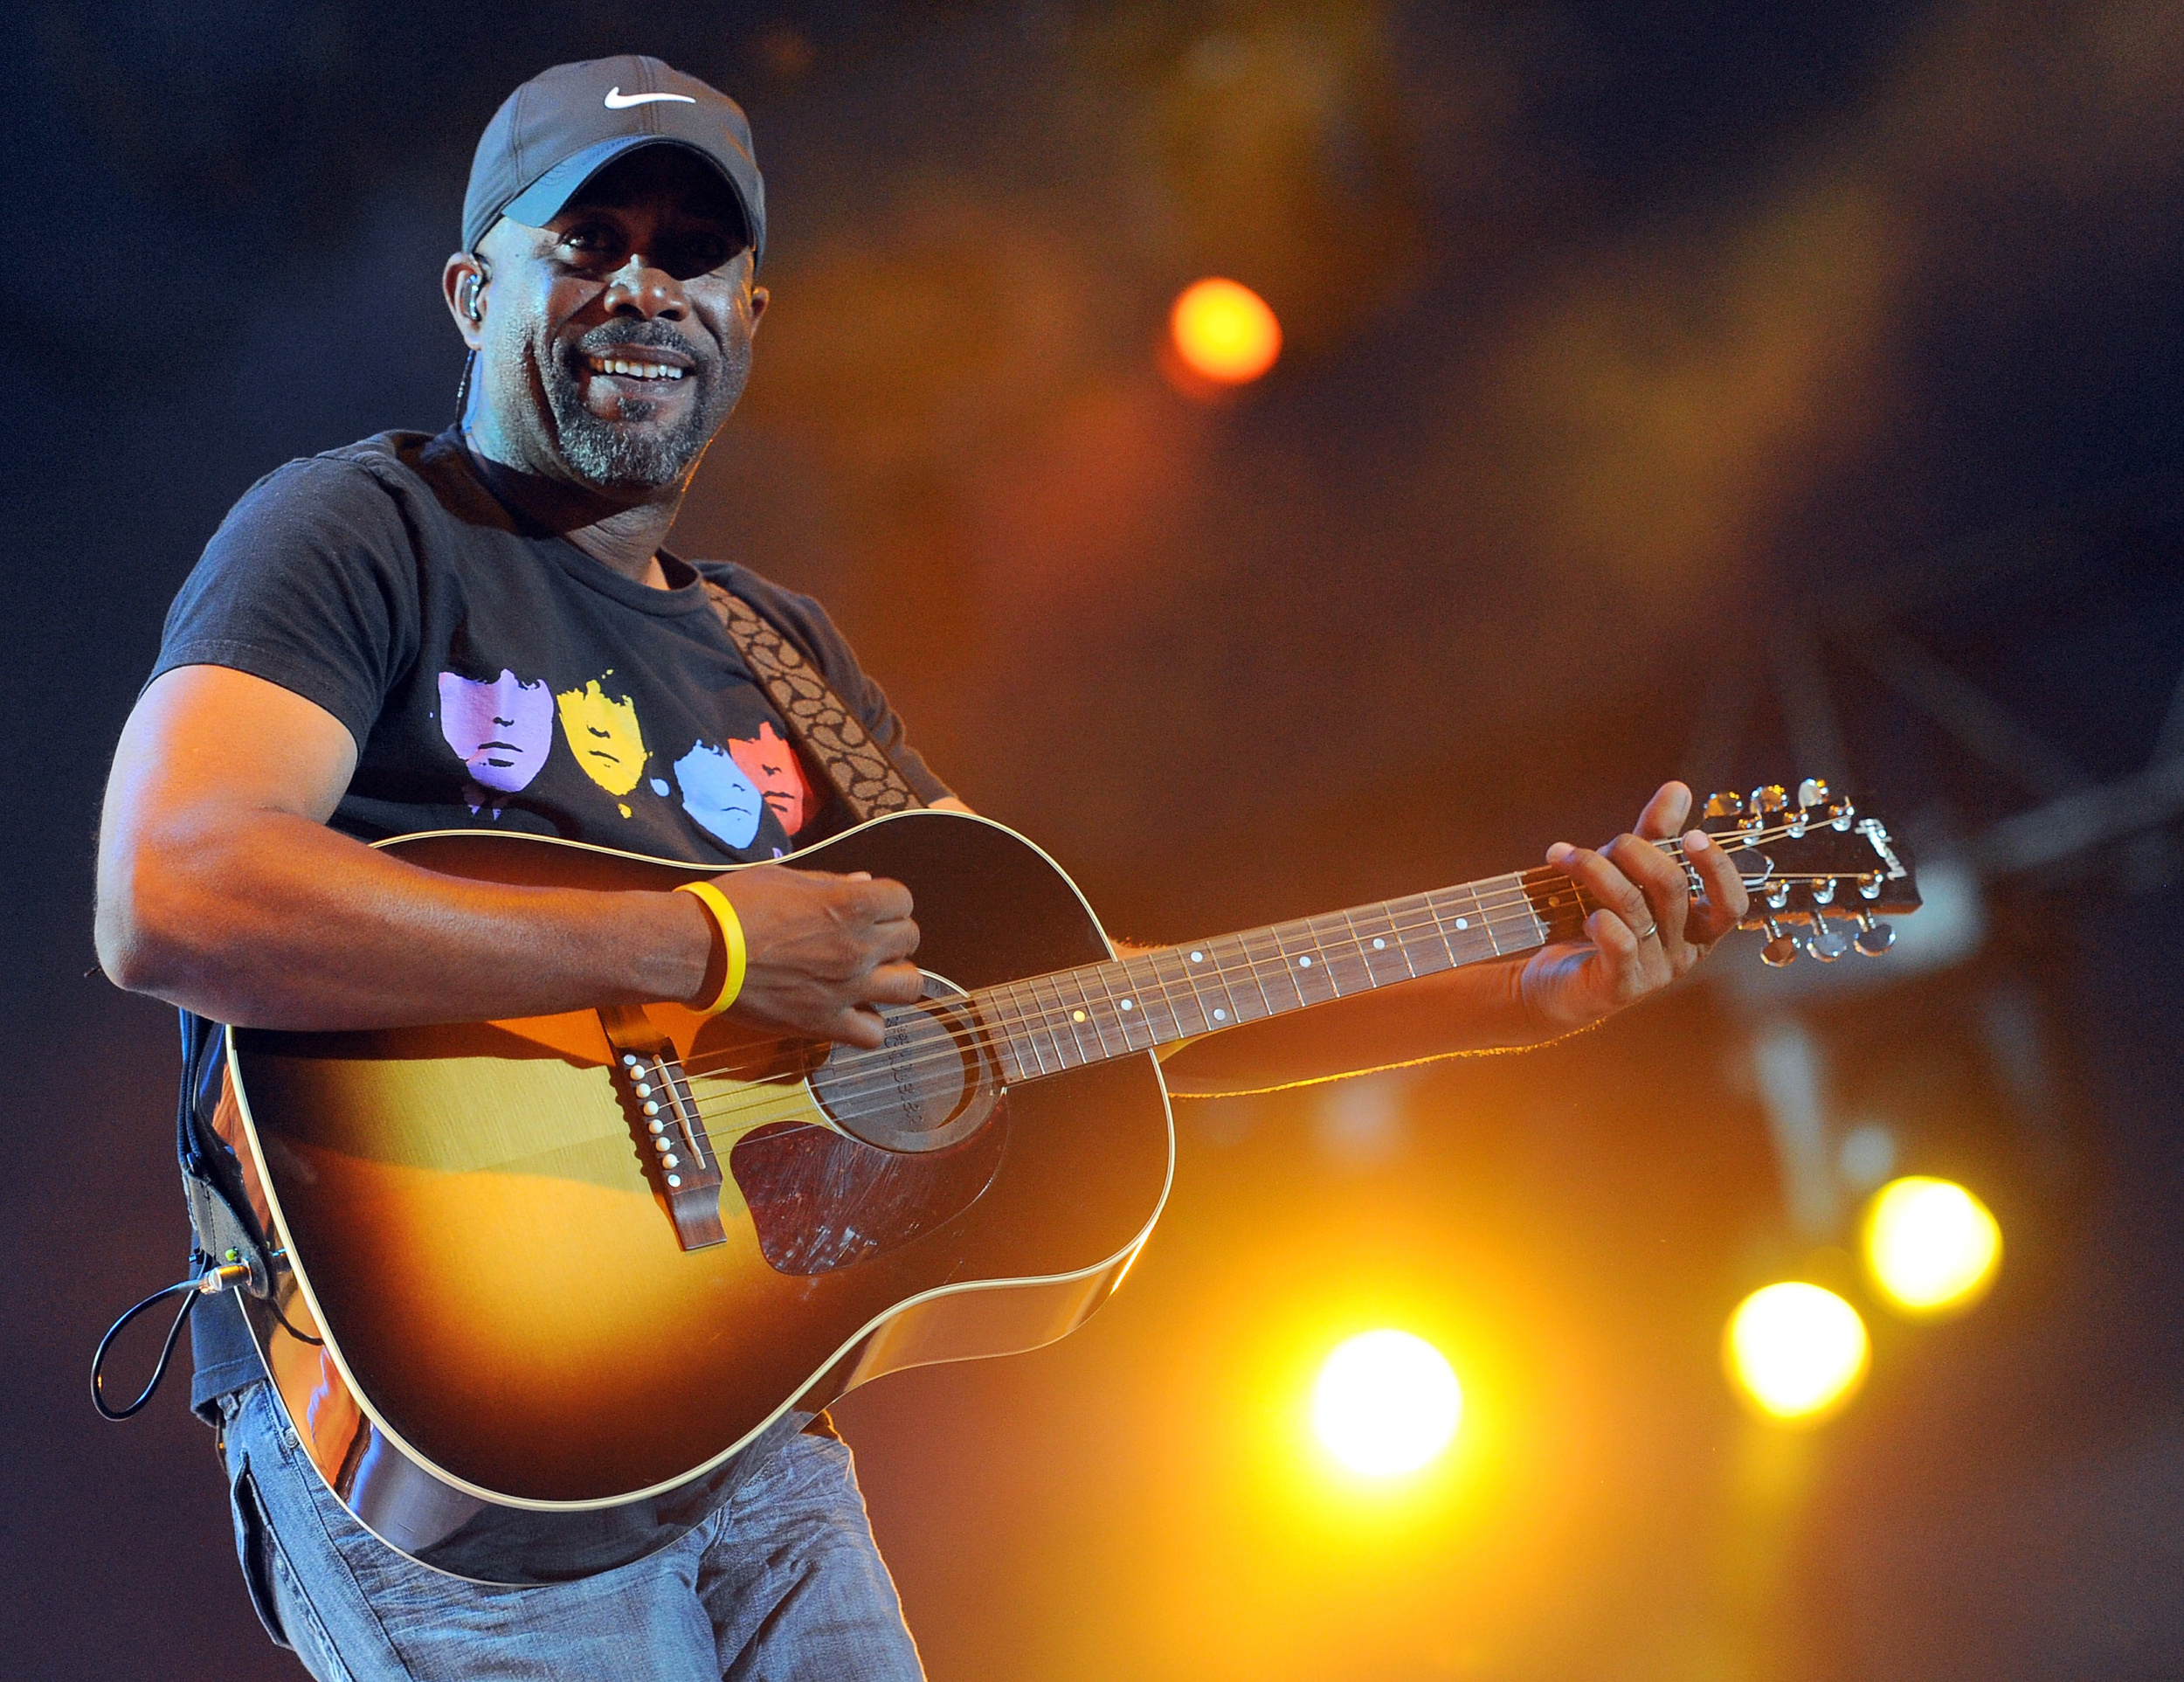 <p>The former frontman of Hootie and the Blowfish, Darius Rucker is now a bonafide country star. It’s arguably a little early to be talking about Hall of Fame inclusion for Rucker, especially when there are so many artists from decades past that still haven’t been inducted yet, but his incredible success with songs like “Wagon Wheel” and “Don’t Think I Don’t Think About It” should not be discounted. </p><p>You may also like: <a href='https://www.yardbarker.com/entertainment/articles/24_fictional_friend_groups_that_make_people_envious/s1__39078595'>24 fictional friend groups that make people envious</a></p>